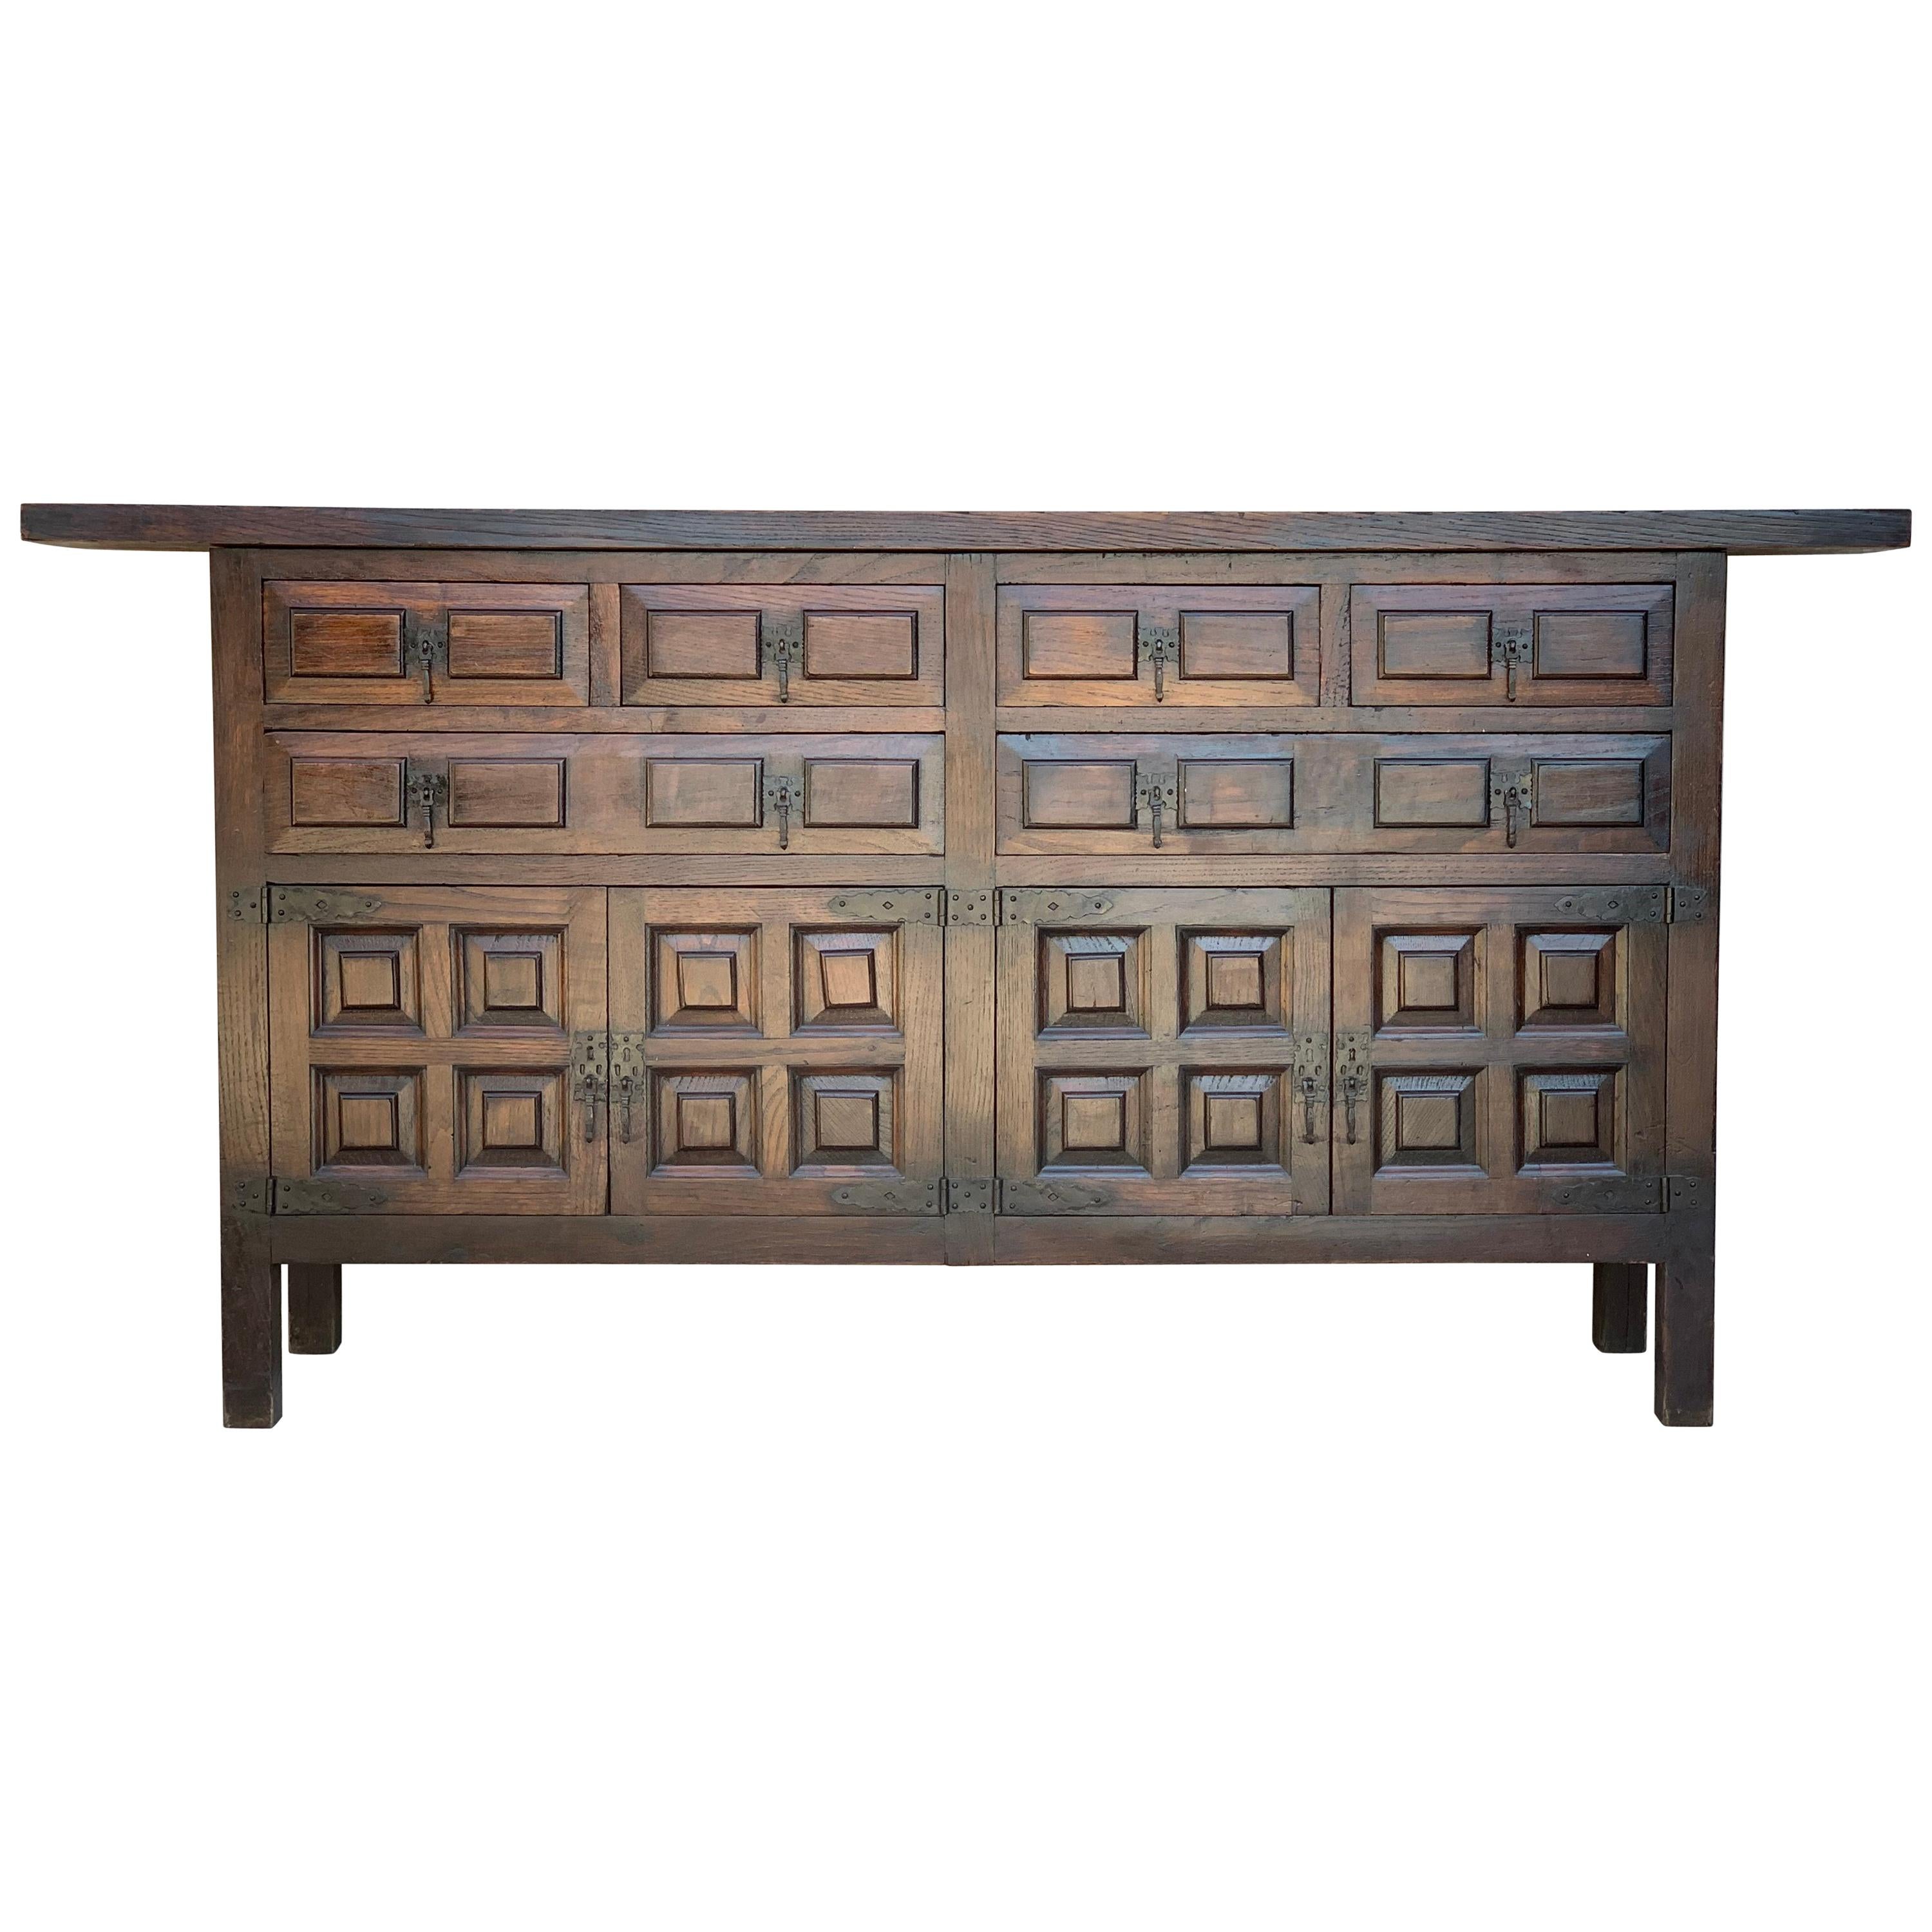 Catalan Spanish Baroque Carved Walnut Tuscan Six Drawers Credenza or Buffet